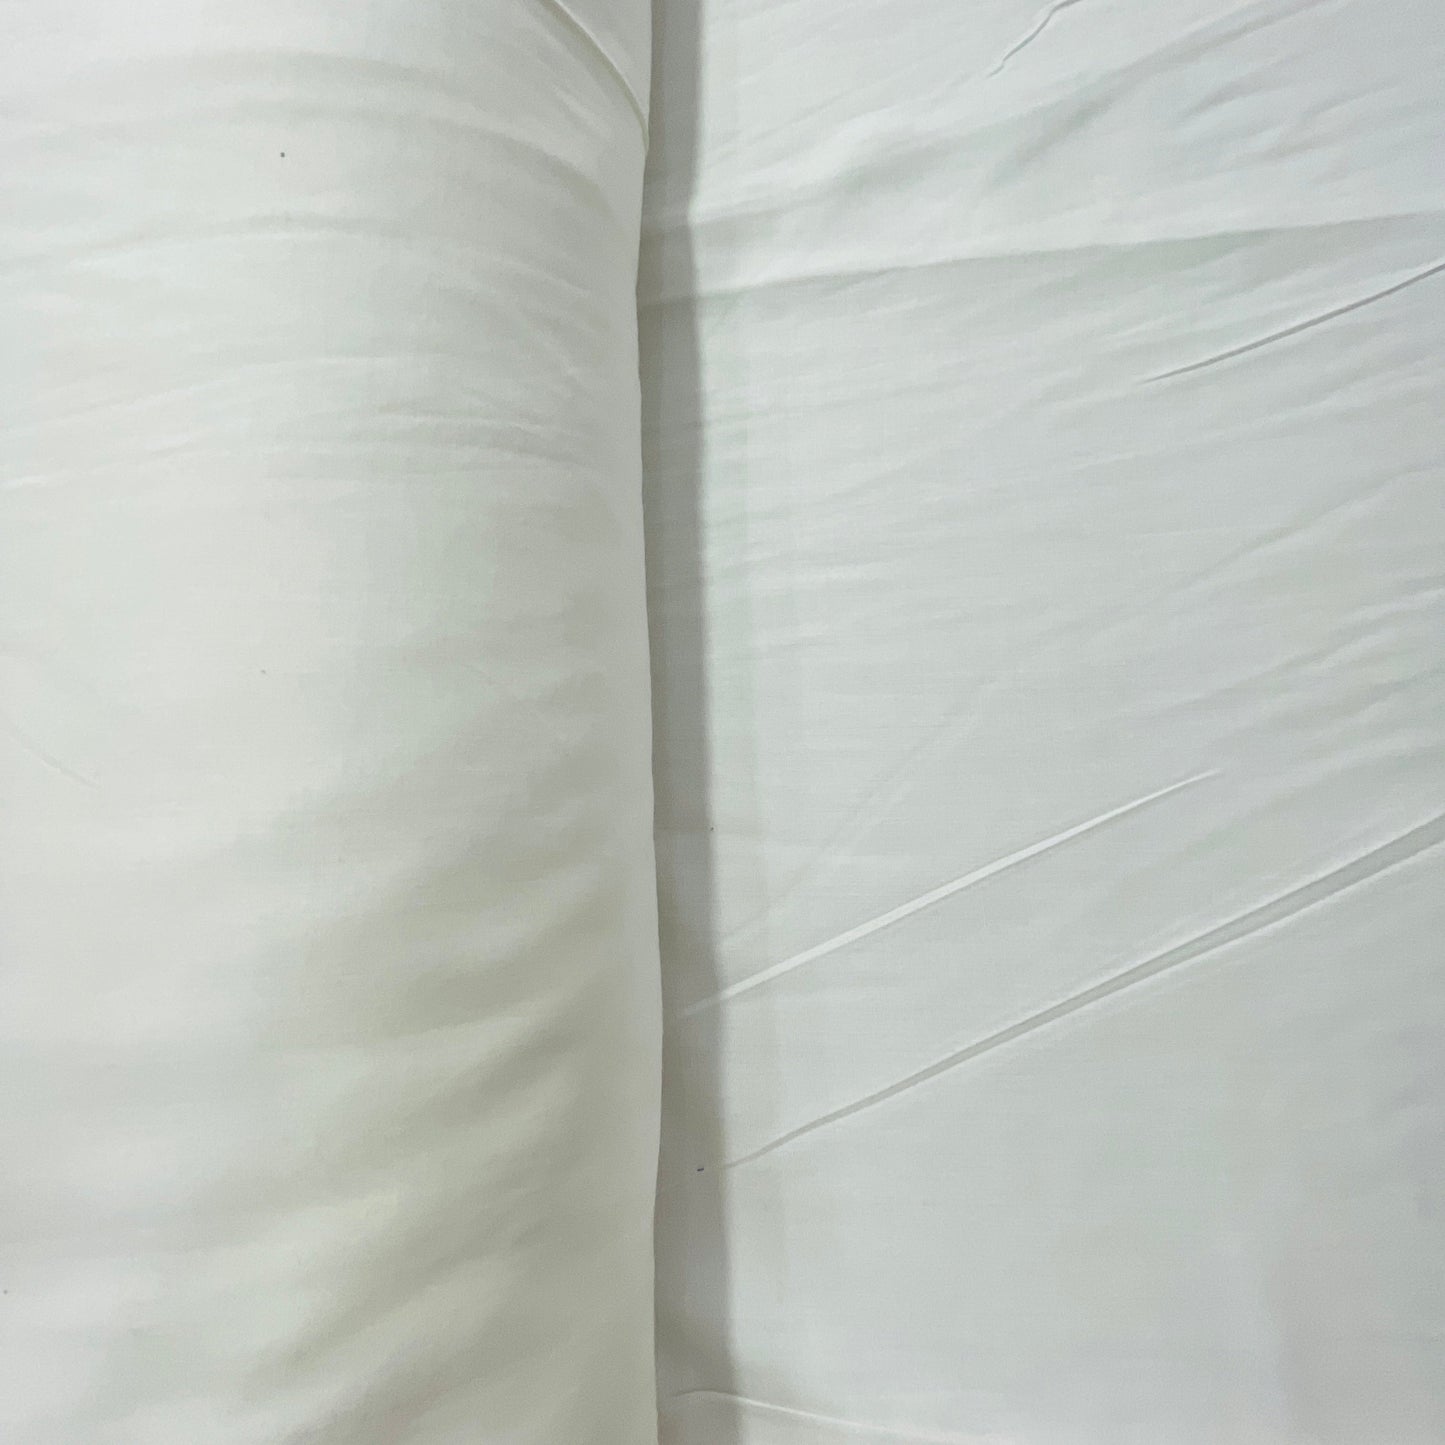 White Solid Dyeable Dull Muslin Fabric - TradeUNO